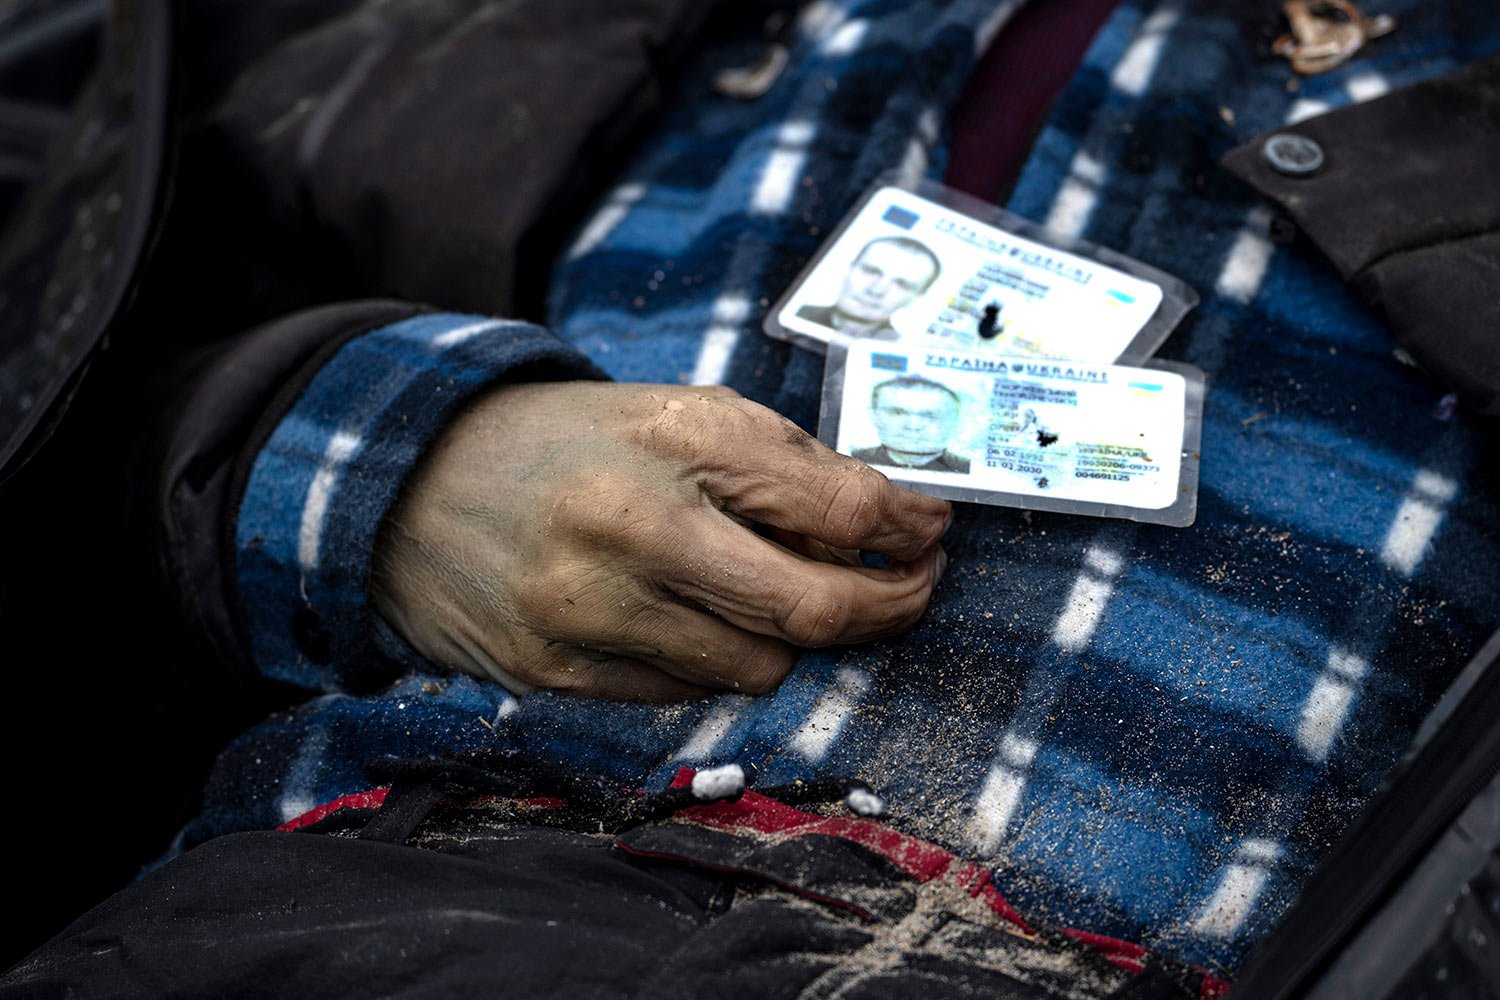  Identification cards rest on a man as policemen work to identify people following the killing of civilians in Bucha, before sending the bodies to the morgue, on the outskirts of Kyiv, Ukraine, Wednesday, April 6, 2022. (AP Photo/Rodrigo Abd) 